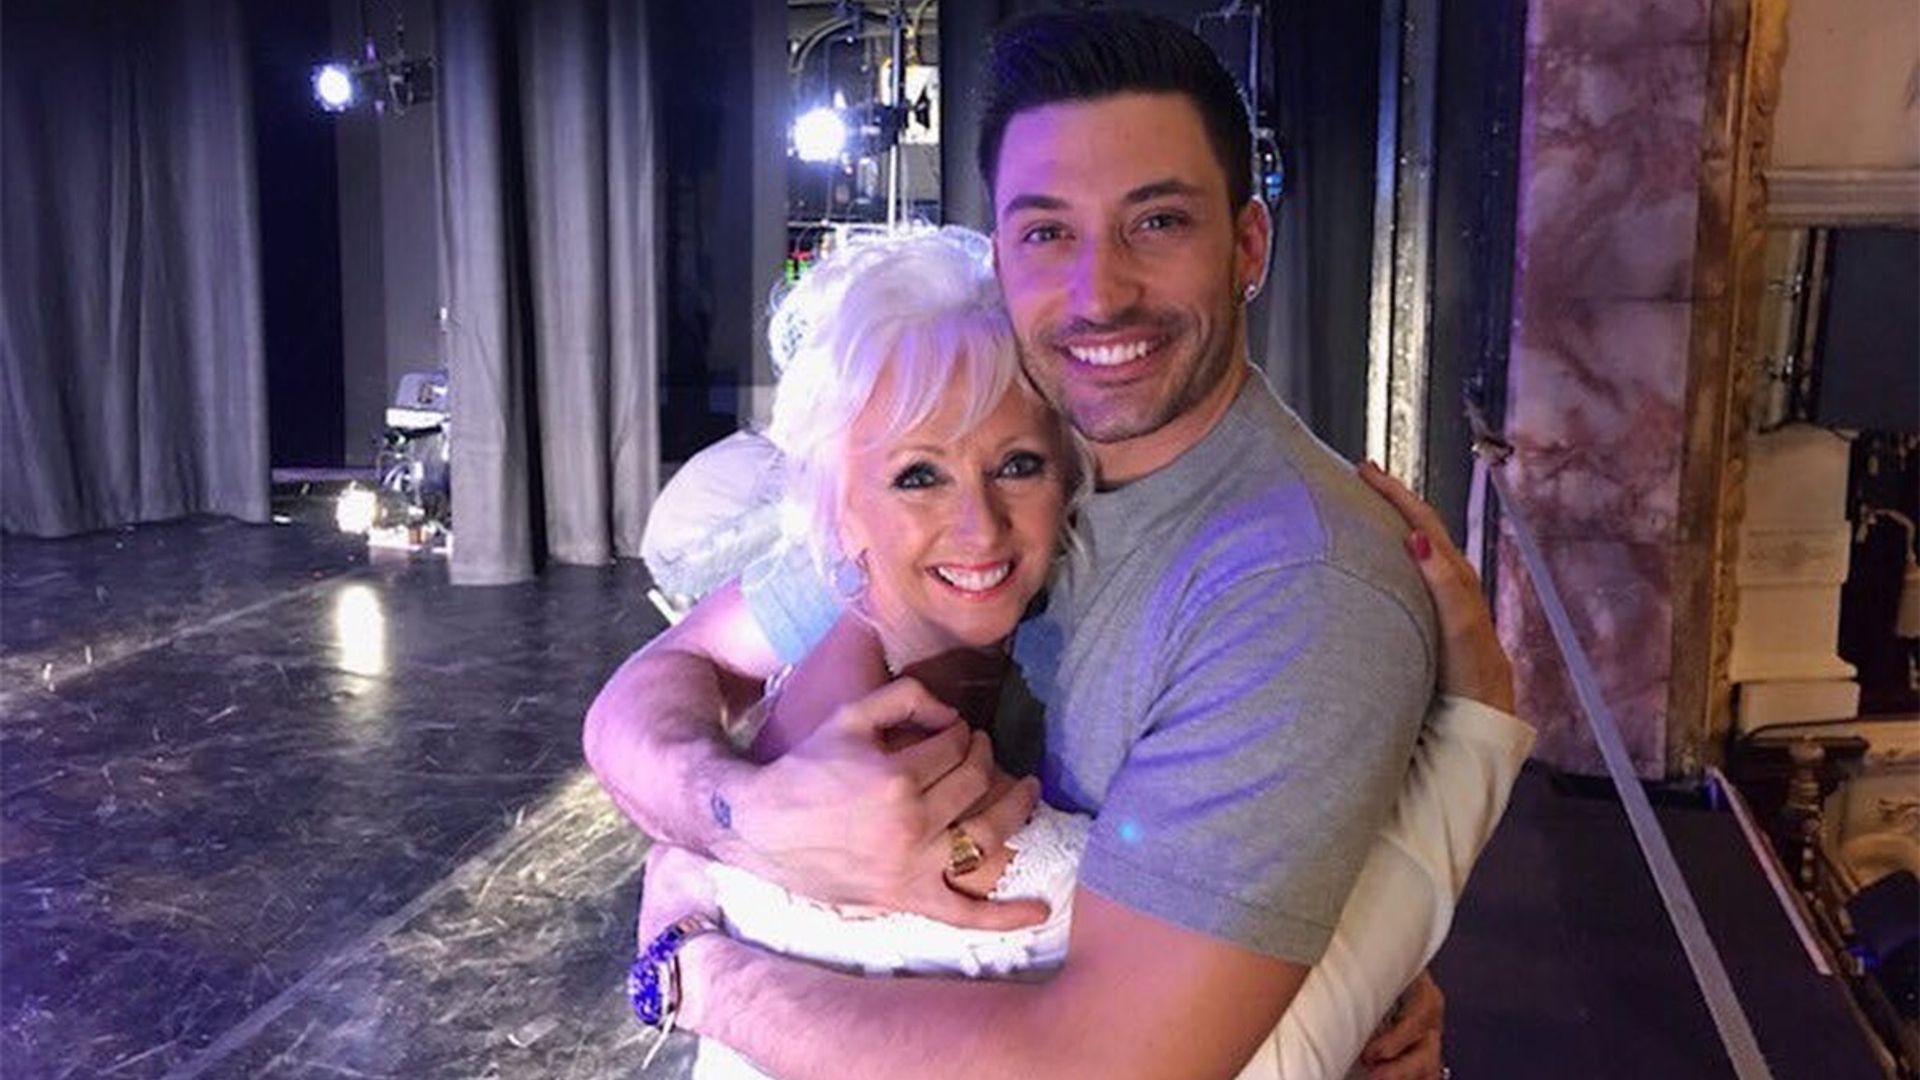 Debbie McGee's sweet reunion with former Strictly partner Giovanni Pernice